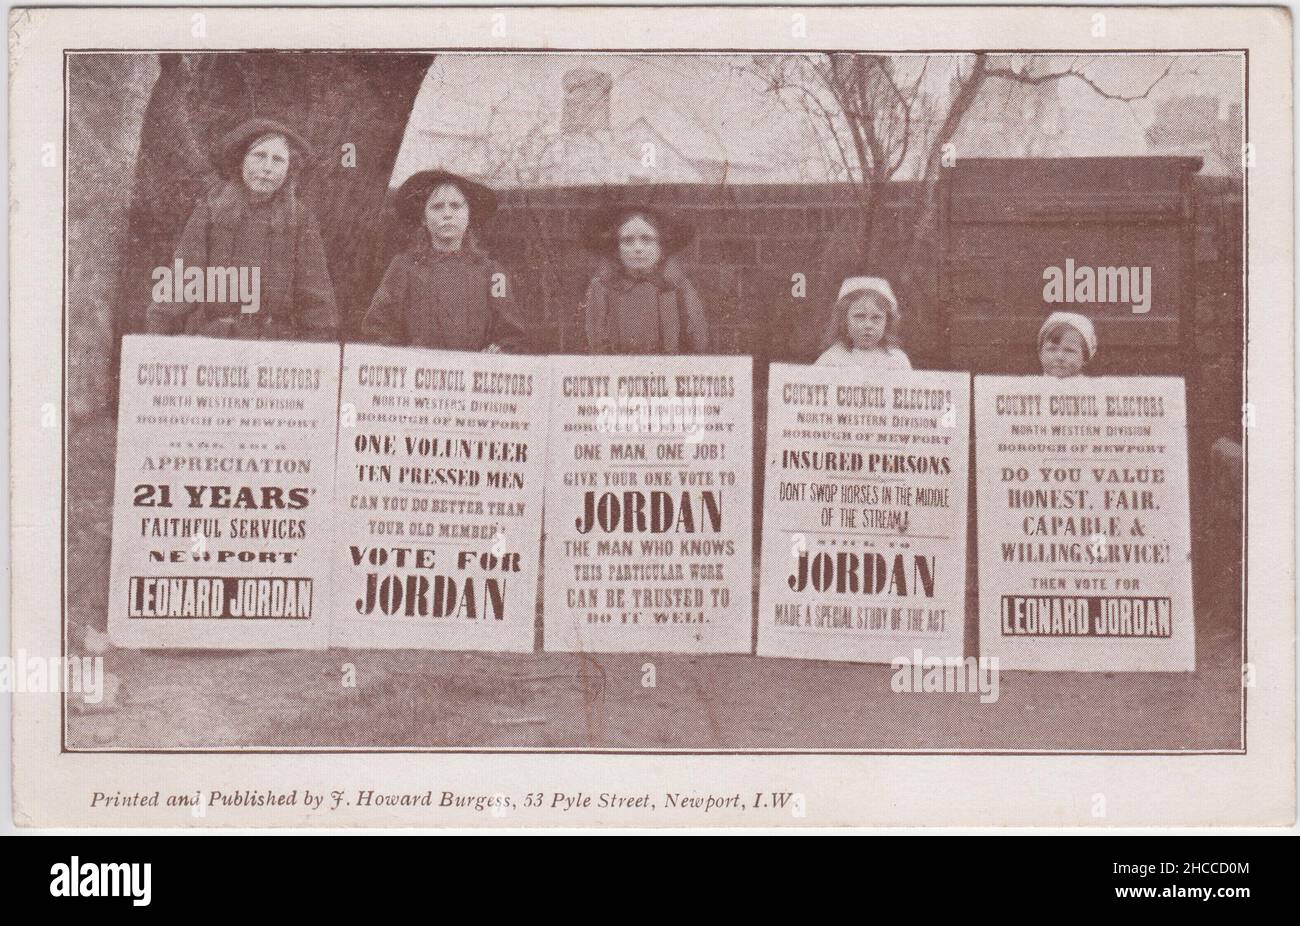 Isle of Wight County Council election campaign: the five daughters of Leonard Jordan (arranged in order of height) display election posters for their father. Jordan served as Liberal Party representative on the Newport North-west Division of the County Council from 1910 to 1918. The image was published as a campaign postcard by J. Howard Burgess of 53 Pyle Street, Newport, IW Stock Photo